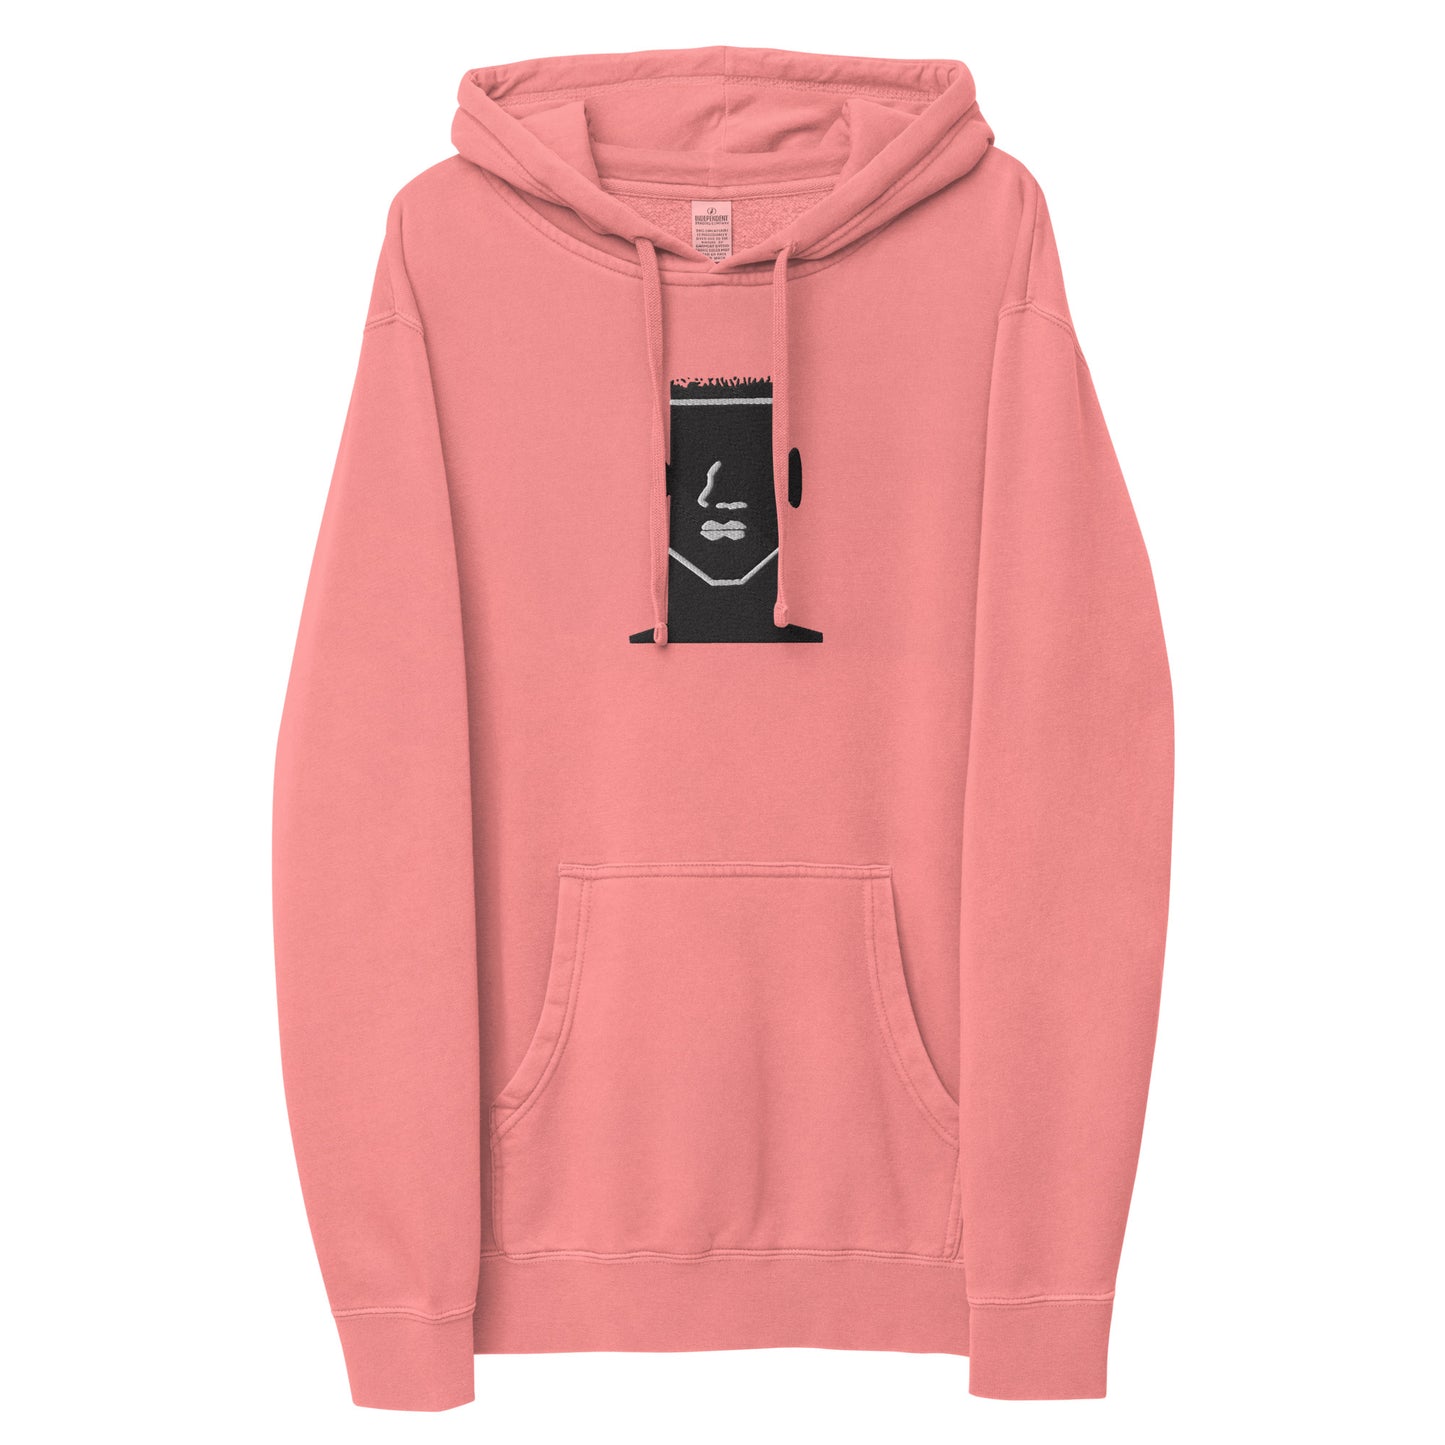 Unisex Embroidered pigment-dyed hoodie